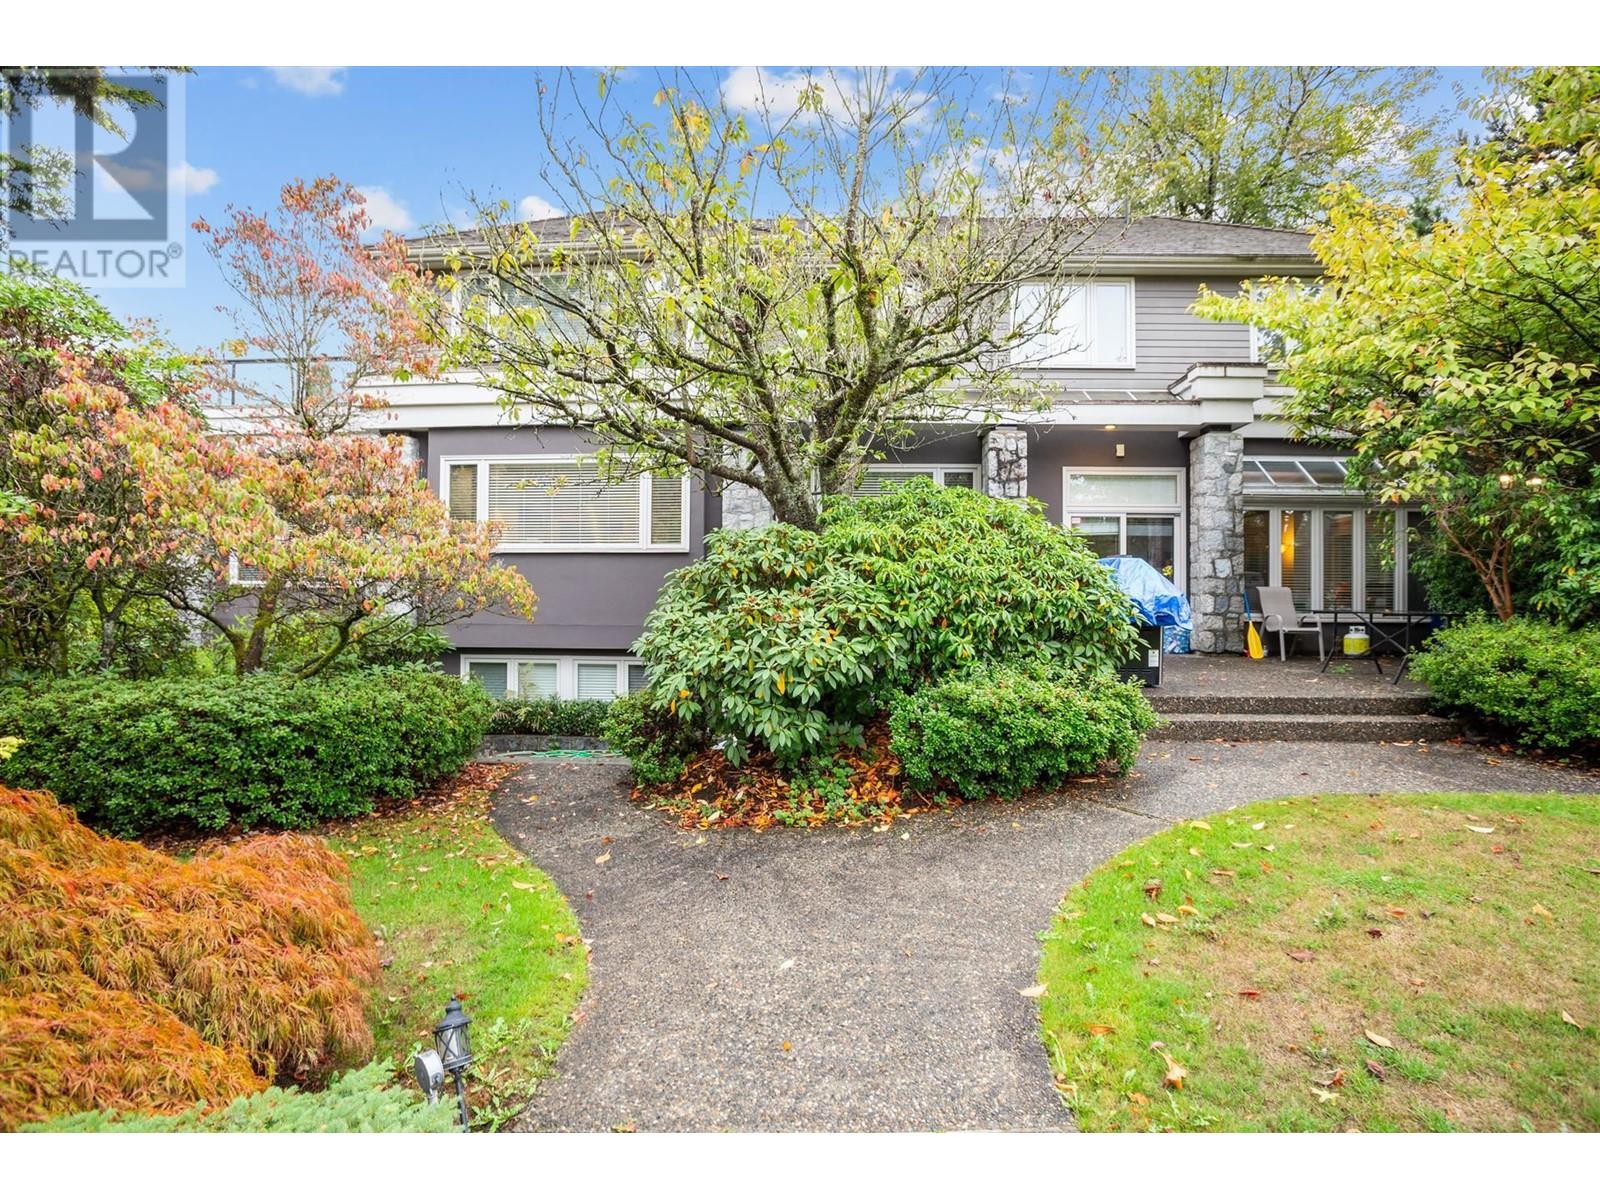 Listing Picture 14 of 15 : 1411 MINTO CRESCENT, Vancouver / 溫哥華 - 魯藝地產 Yvonne Lu Group - MLS Medallion Club Member